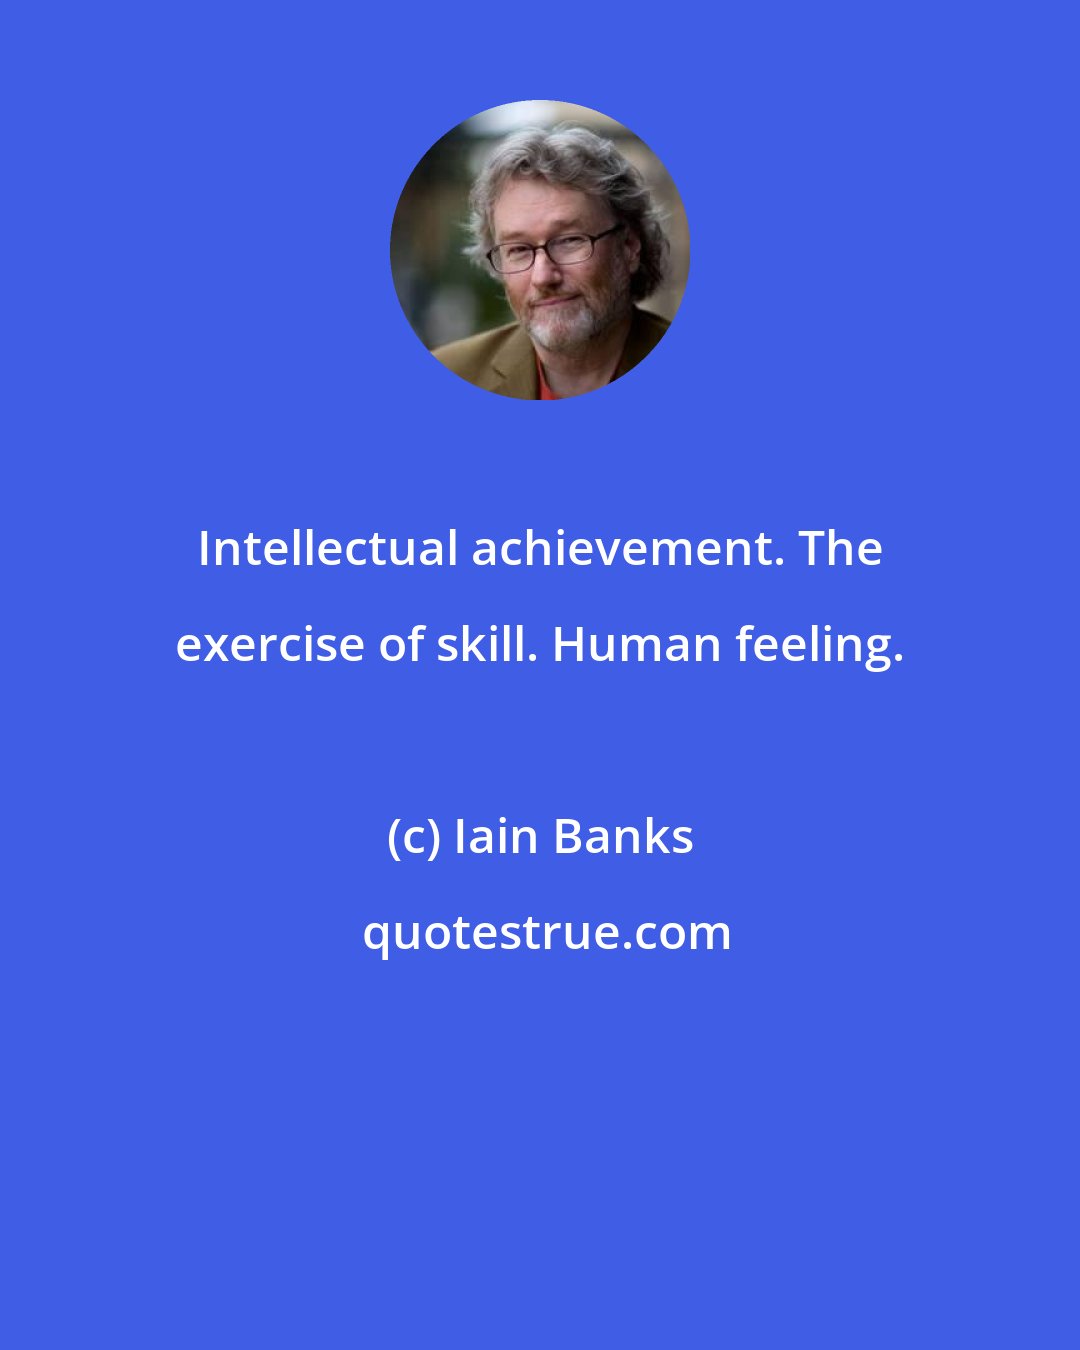 Iain Banks: Intellectual achievement. The exercise of skill. Human feeling.